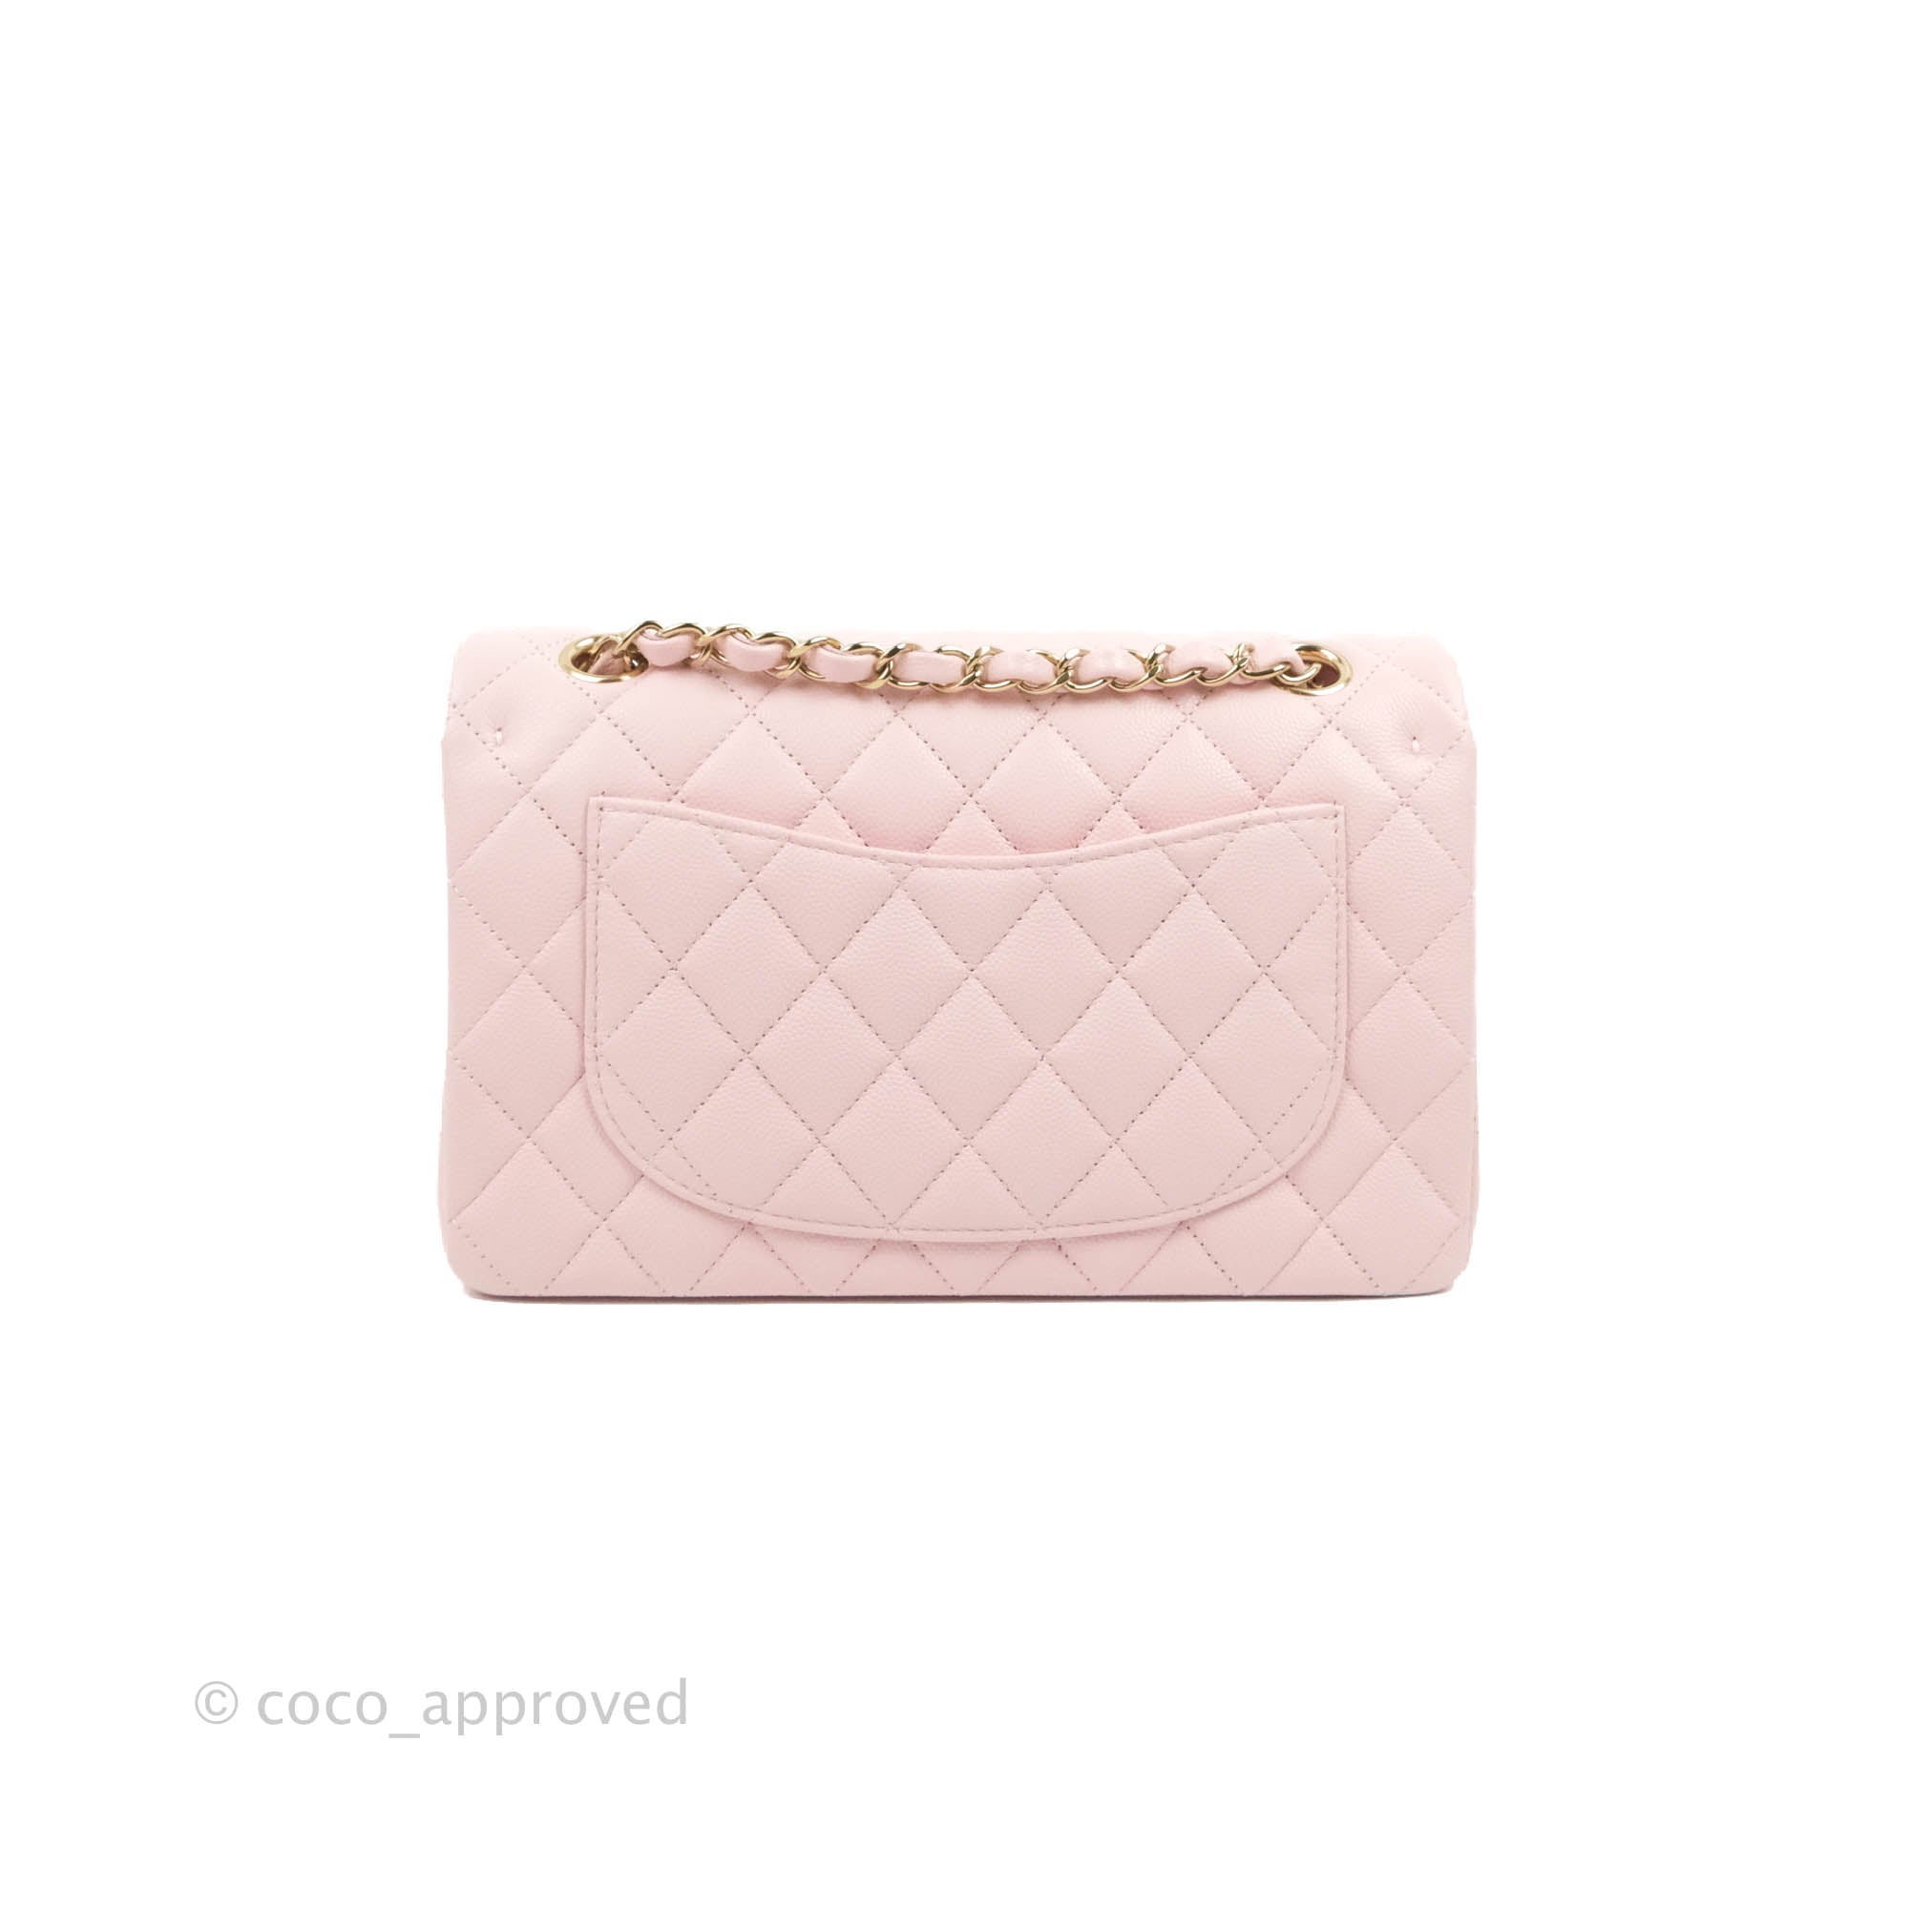 CHANEL Lambskin Quilted Small Double Flap Bag  Double flap, Chanel classic  flap pink, Chanel classic flap